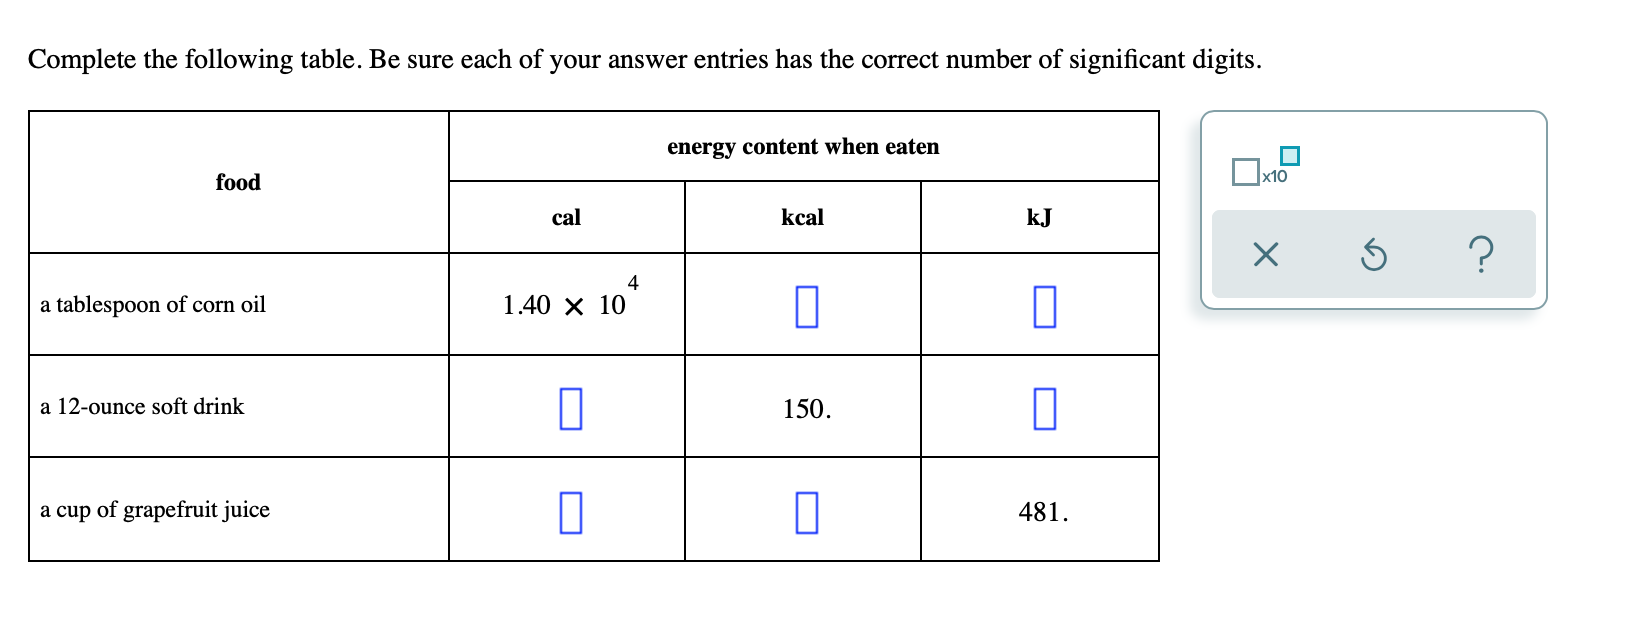 Complete the following table. Be sure each of your answer entries has the correct number of significant digits.
energy content when eaten
food
kcal
kJ
cal
?
4
1.40 X 10
a tablespoon of corn oil
150
a 12-ounce soft drink
a cup of grapefruit juice
481
X
